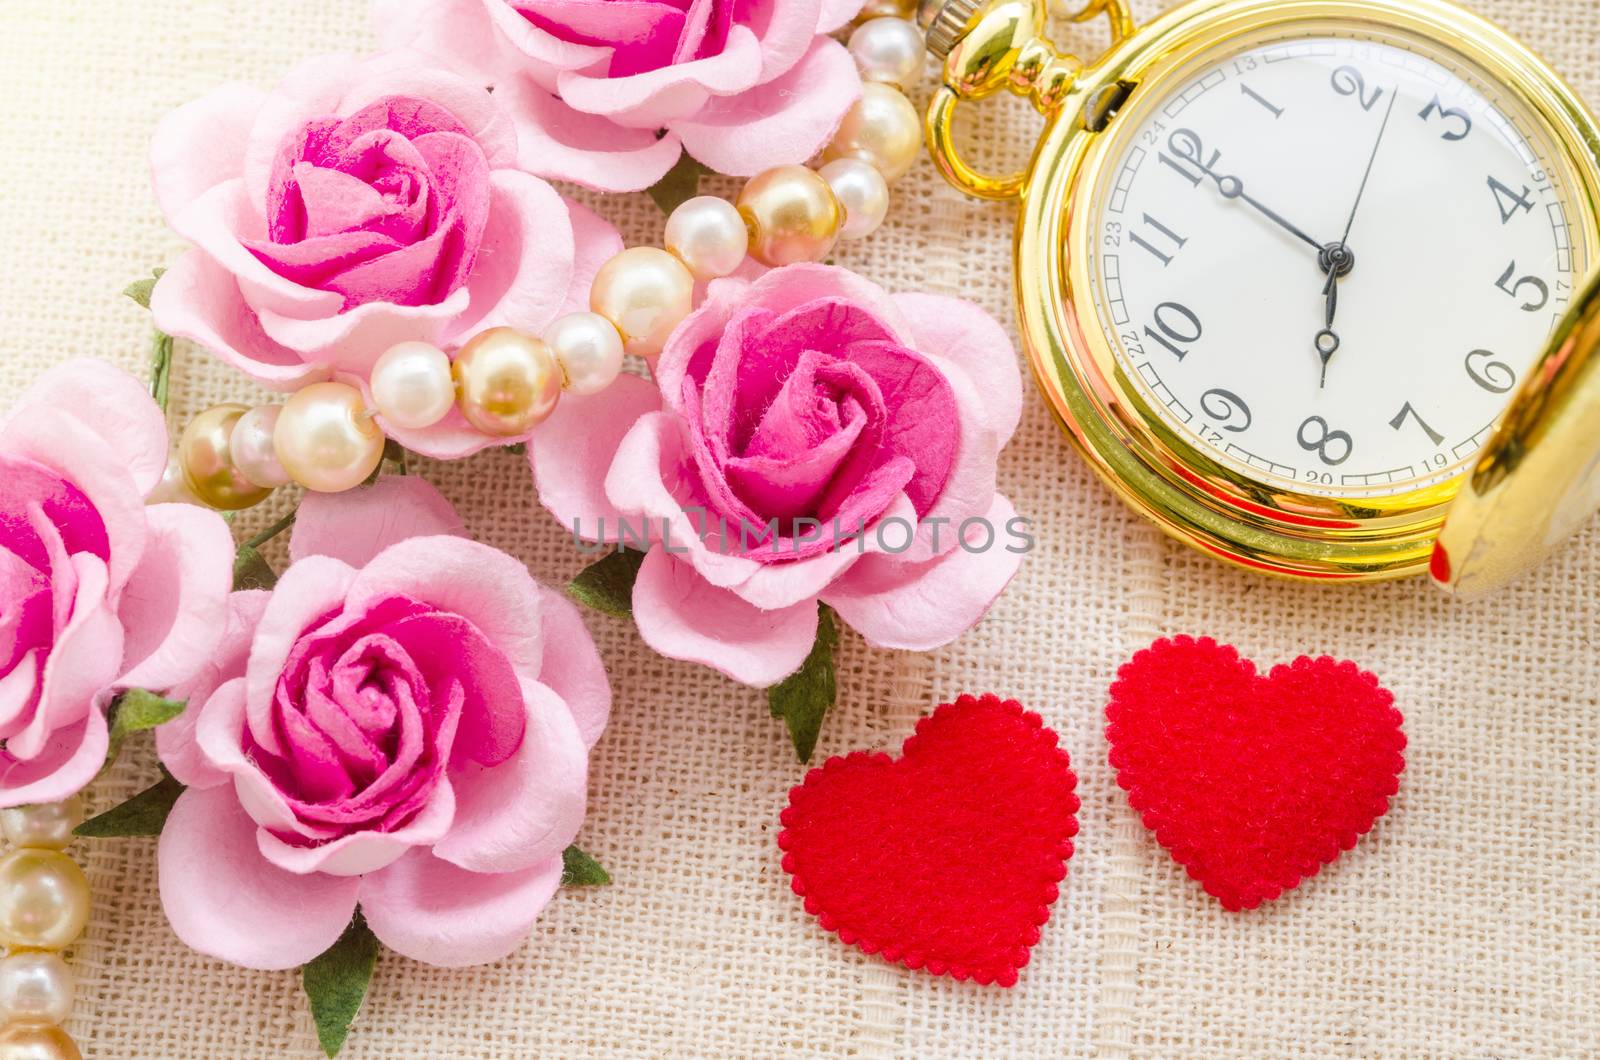 Red heart and pink rose with gold pocket watch on fabric background. Love of time concept.